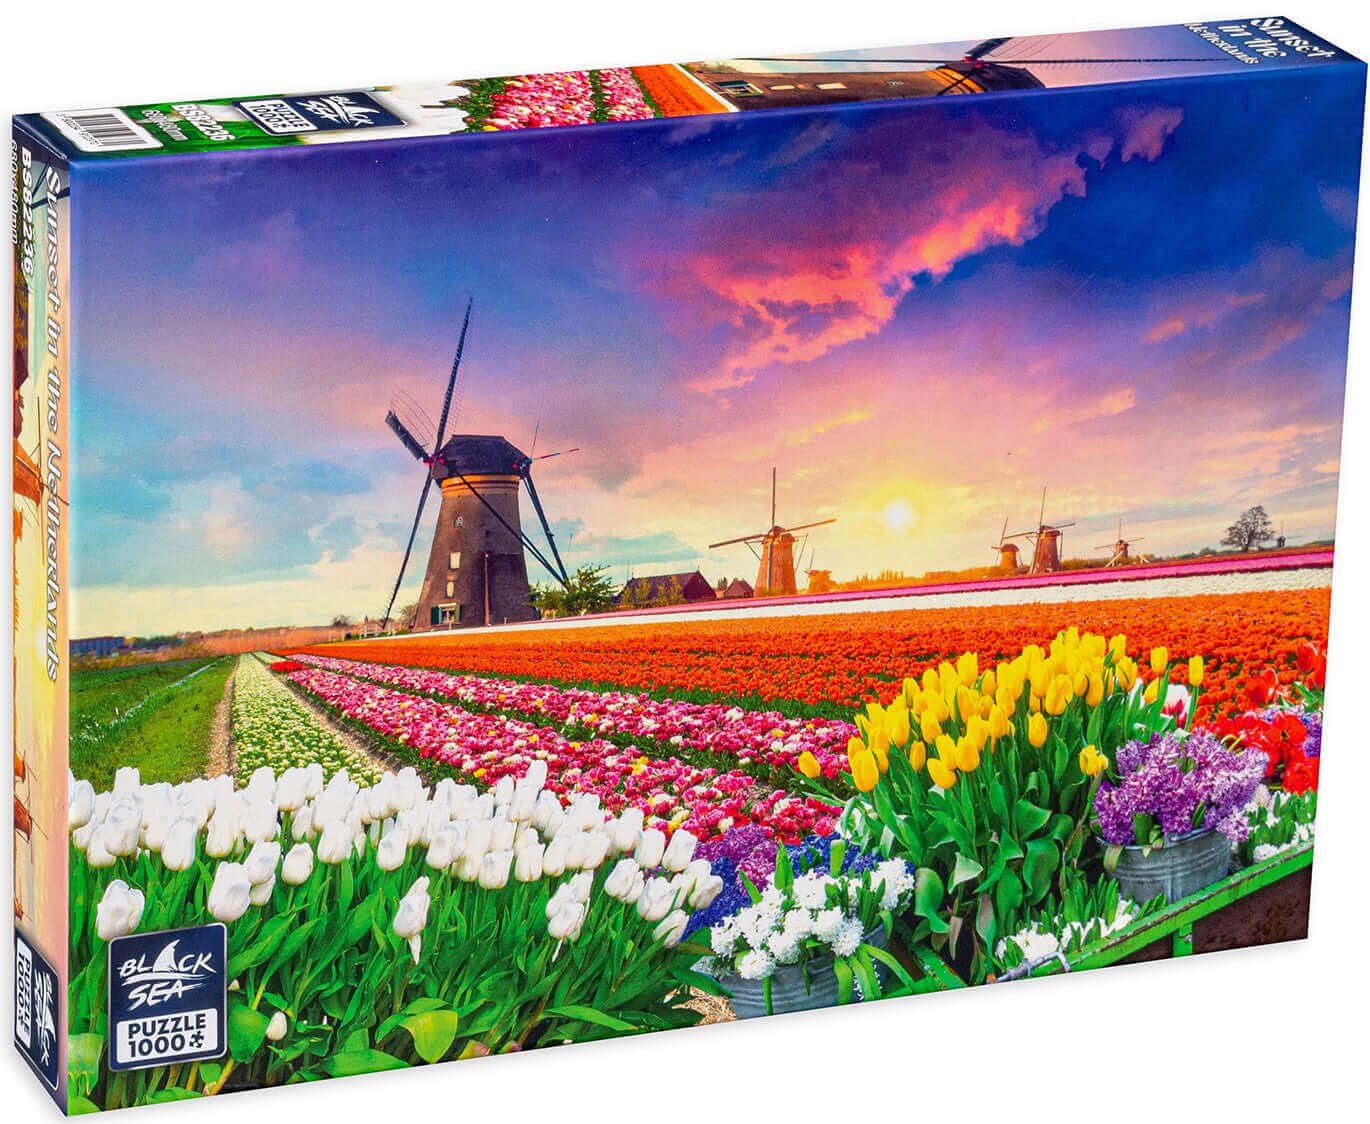 Puzzle Black Sea 1000 pieces - Sunset in the Netherlands, -